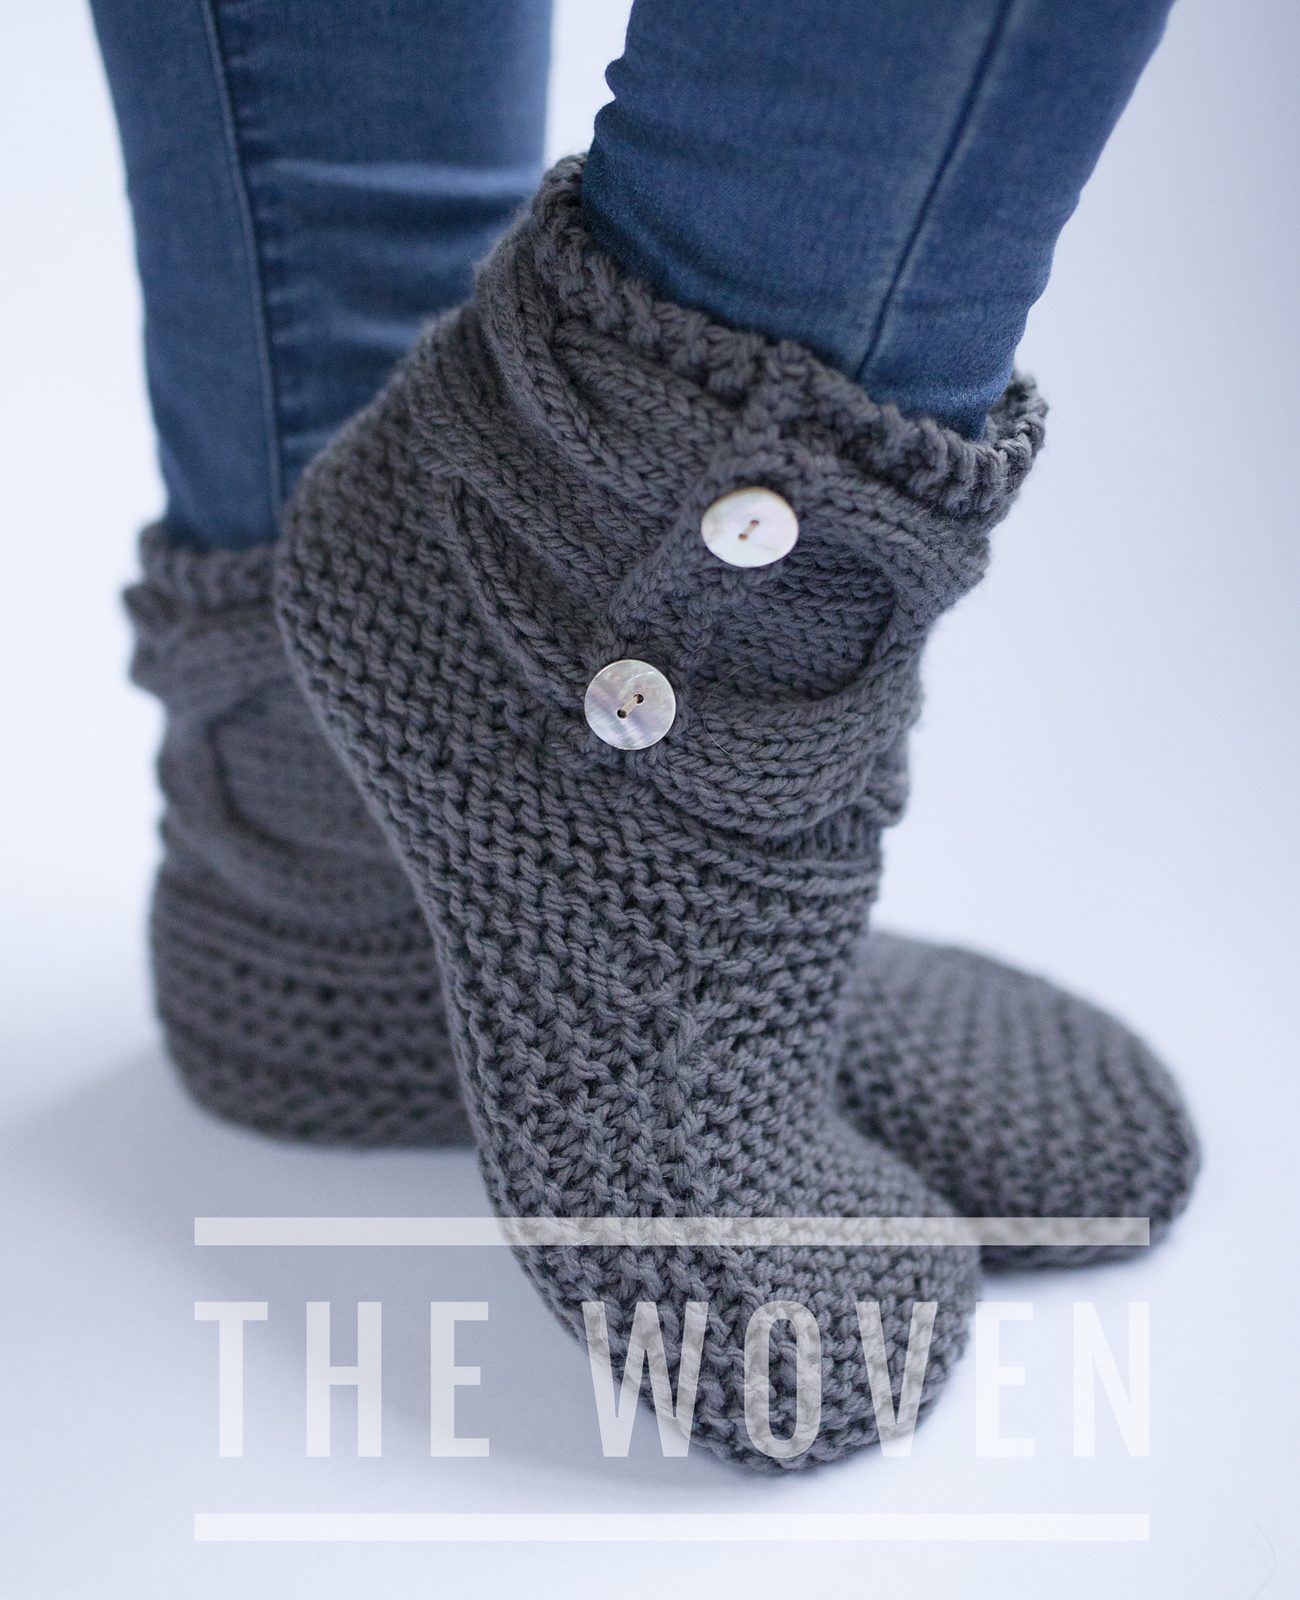 Slipper Socks and Boots Knitting Patterns | In the Loop Knitting